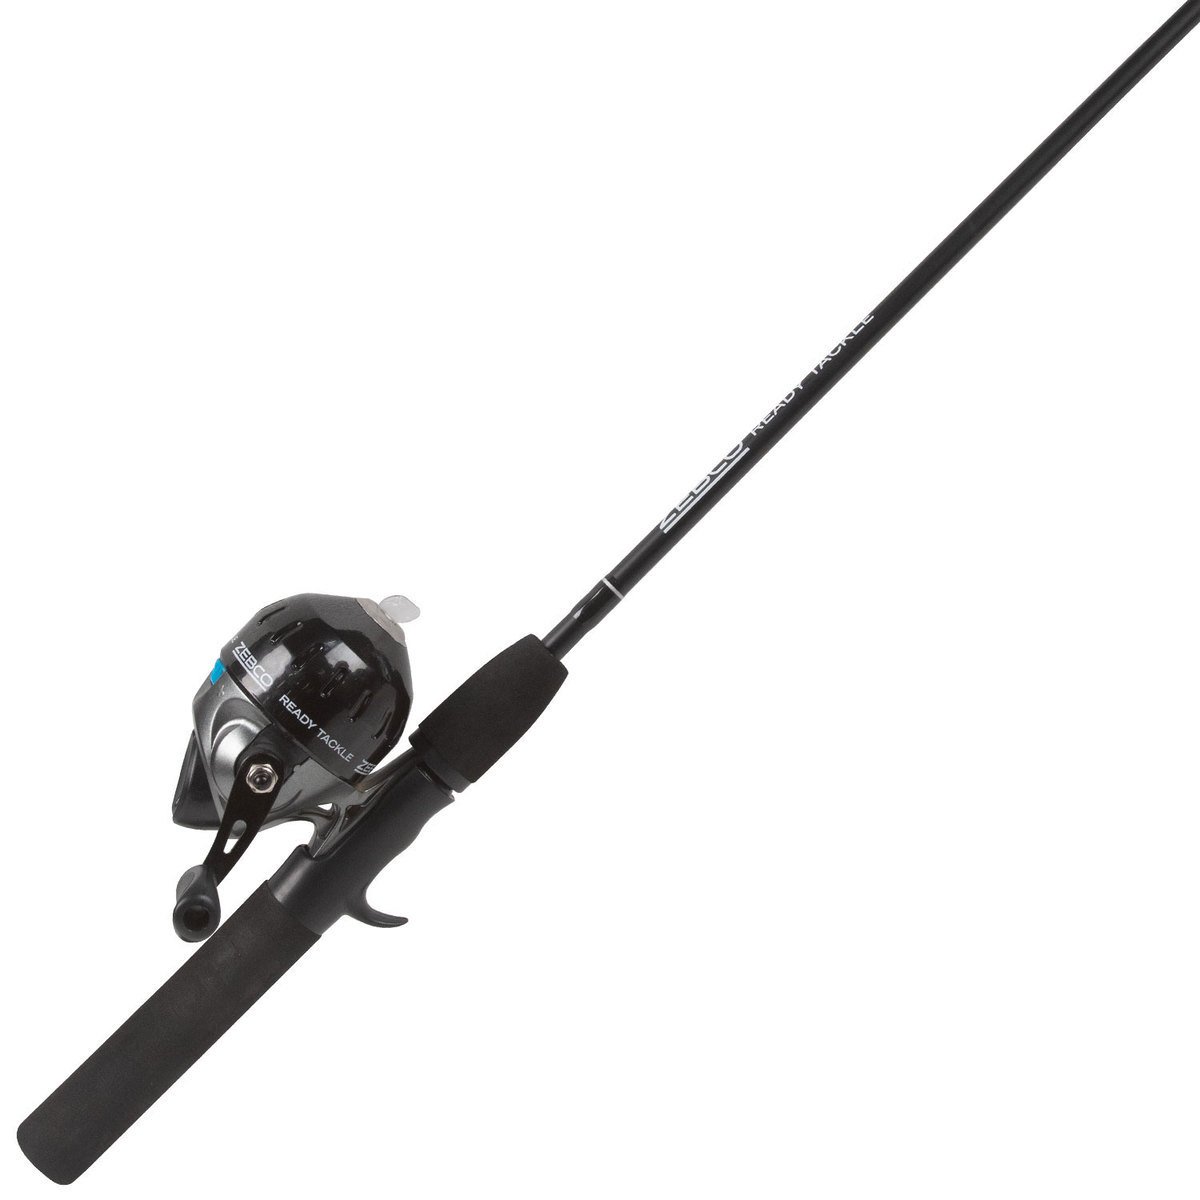 Zebco 33 Approach Spincast Combo, Red - 714373, Spincast Combos at  Sportsman's Guide